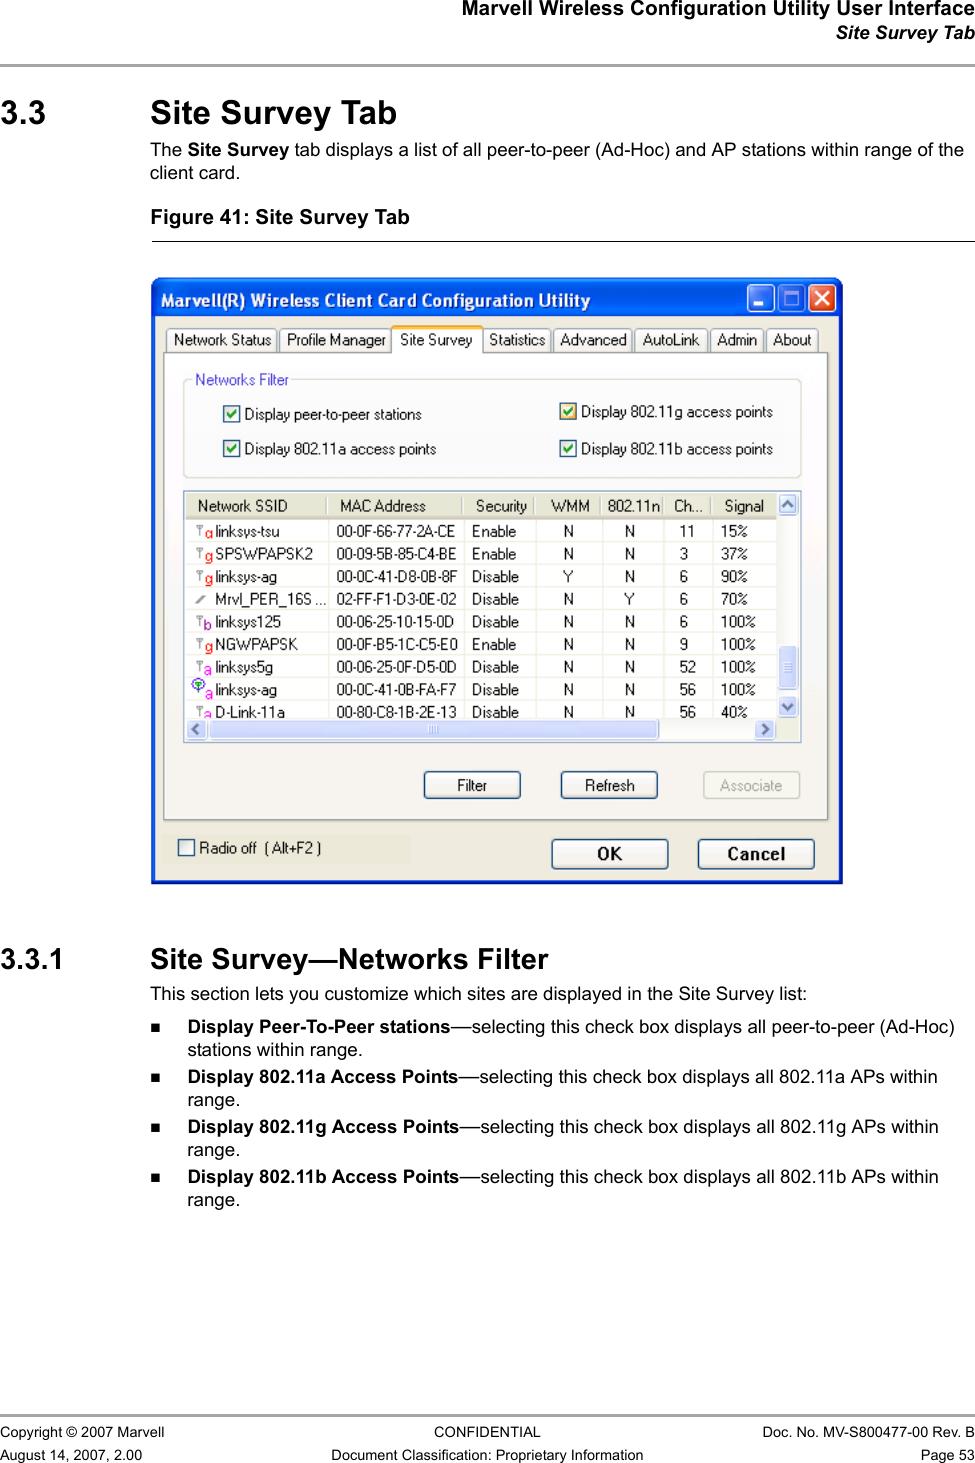 Marvell Wireless Configuration Utility User InterfaceSite Survey Tab                         Copyright © 2007 Marvell CONFIDENTIAL Doc. No. MV-S800477-00 Rev. BAugust 14, 2007, 2.00 Document Classification: Proprietary Information Page 53 3.3 Site Survey TabThe Site Survey tab displays a list of all peer-to-peer (Ad-Hoc) and AP stations within range of the client card.3.3.1 Site Survey—Networks FilterThis section lets you customize which sites are displayed in the Site Survey list:Display Peer-To-Peer stations—selecting this check box displays all peer-to-peer (Ad-Hoc) stations within range.Display 802.11a Access Points—selecting this check box displays all 802.11a APs within range.Display 802.11g Access Points—selecting this check box displays all 802.11g APs within range.Display 802.11b Access Points—selecting this check box displays all 802.11b APs within range.Figure 41: Site Survey Tab                         